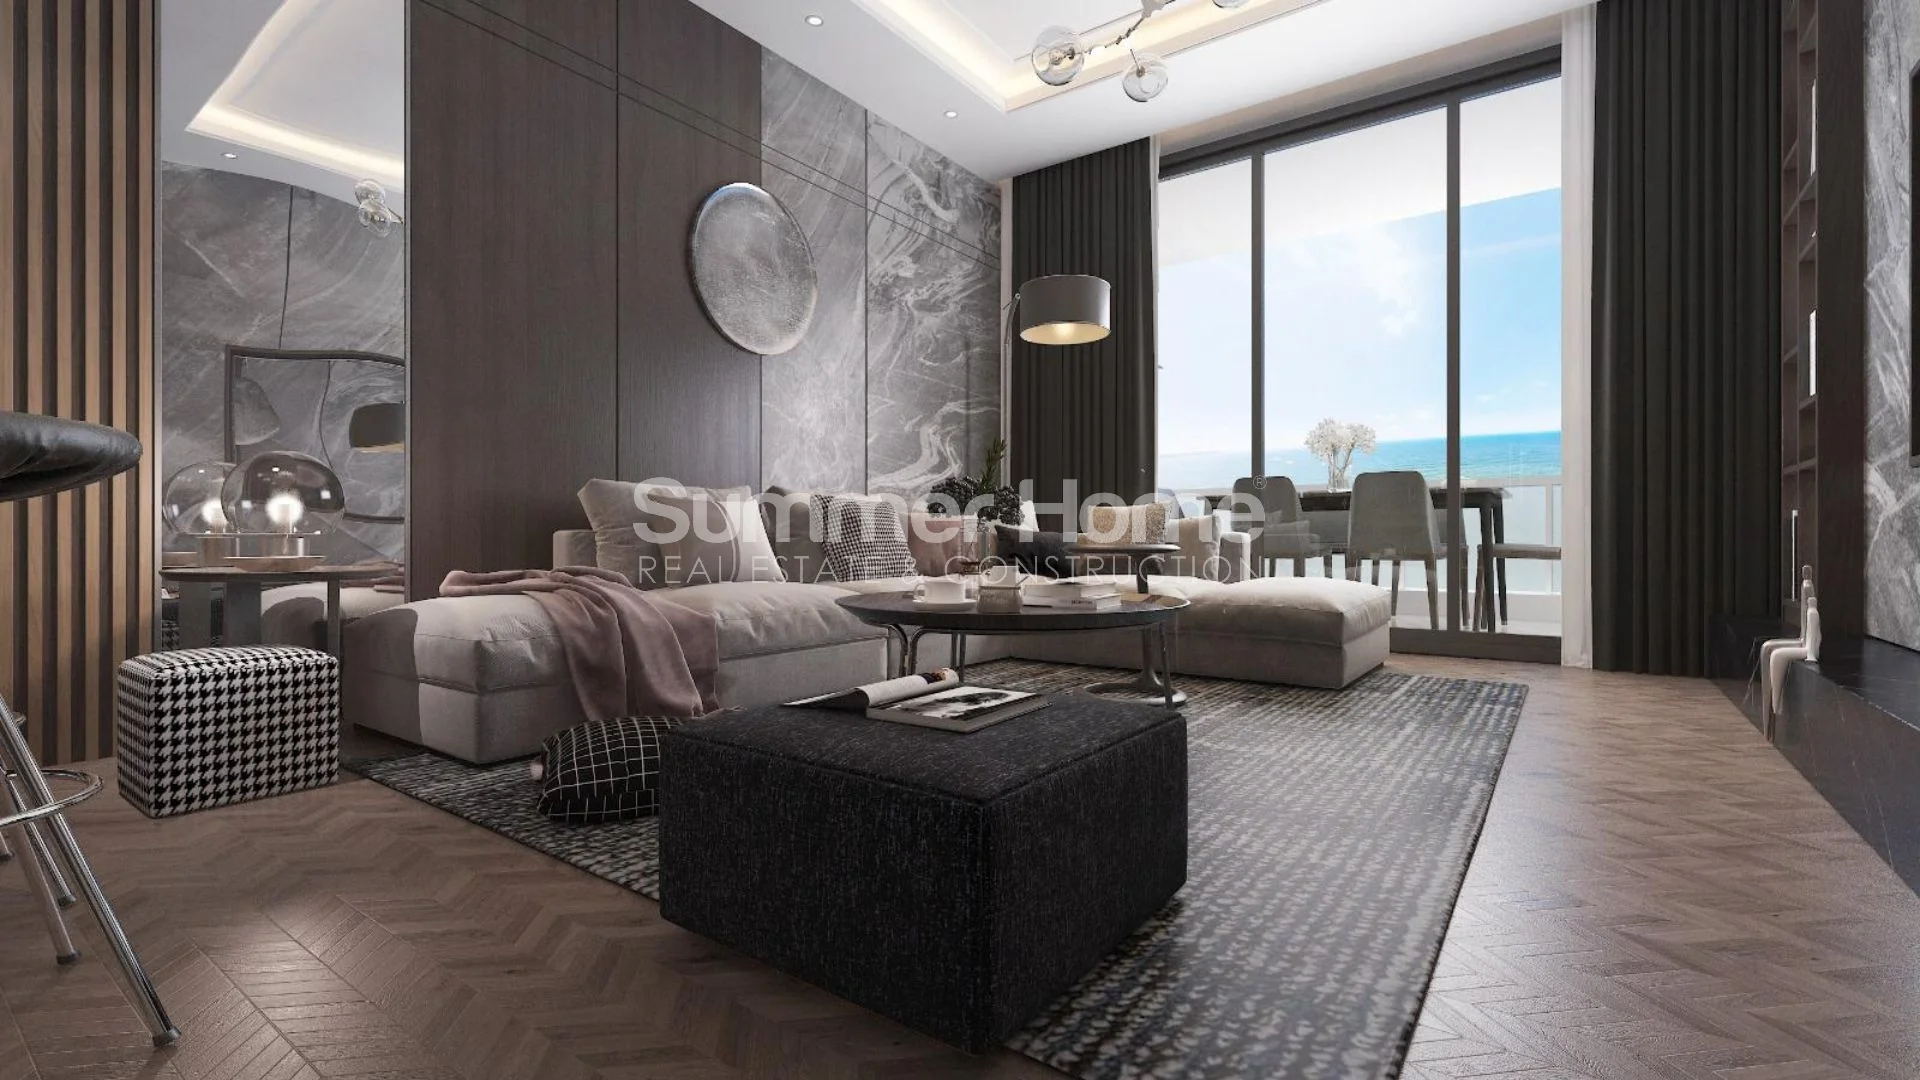 Highly stylish apartments located in Mezitli, Mersin Interior - 6